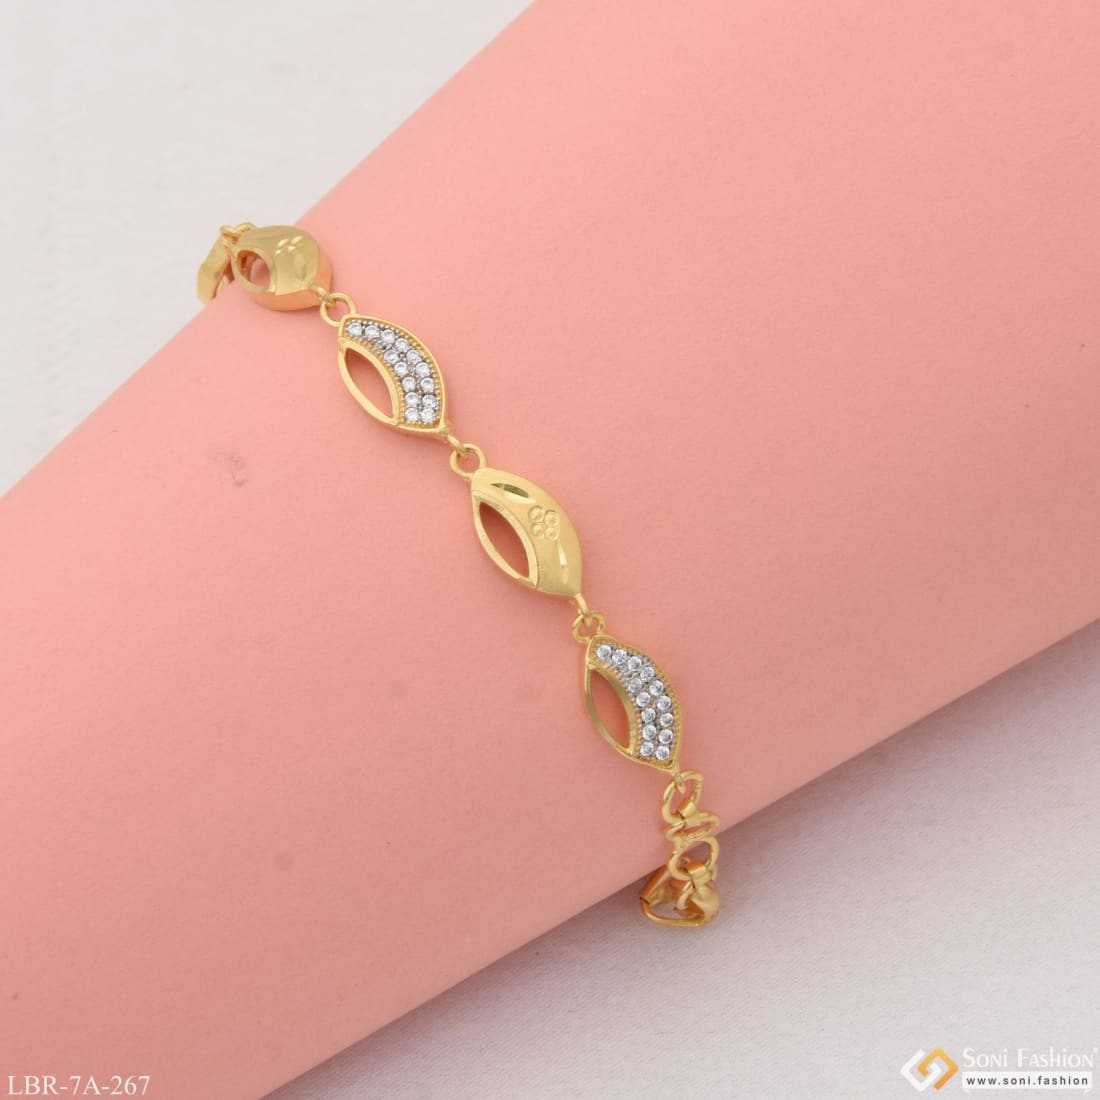 Should you choose a bracelet in white or yellow gold? - BAUNAT